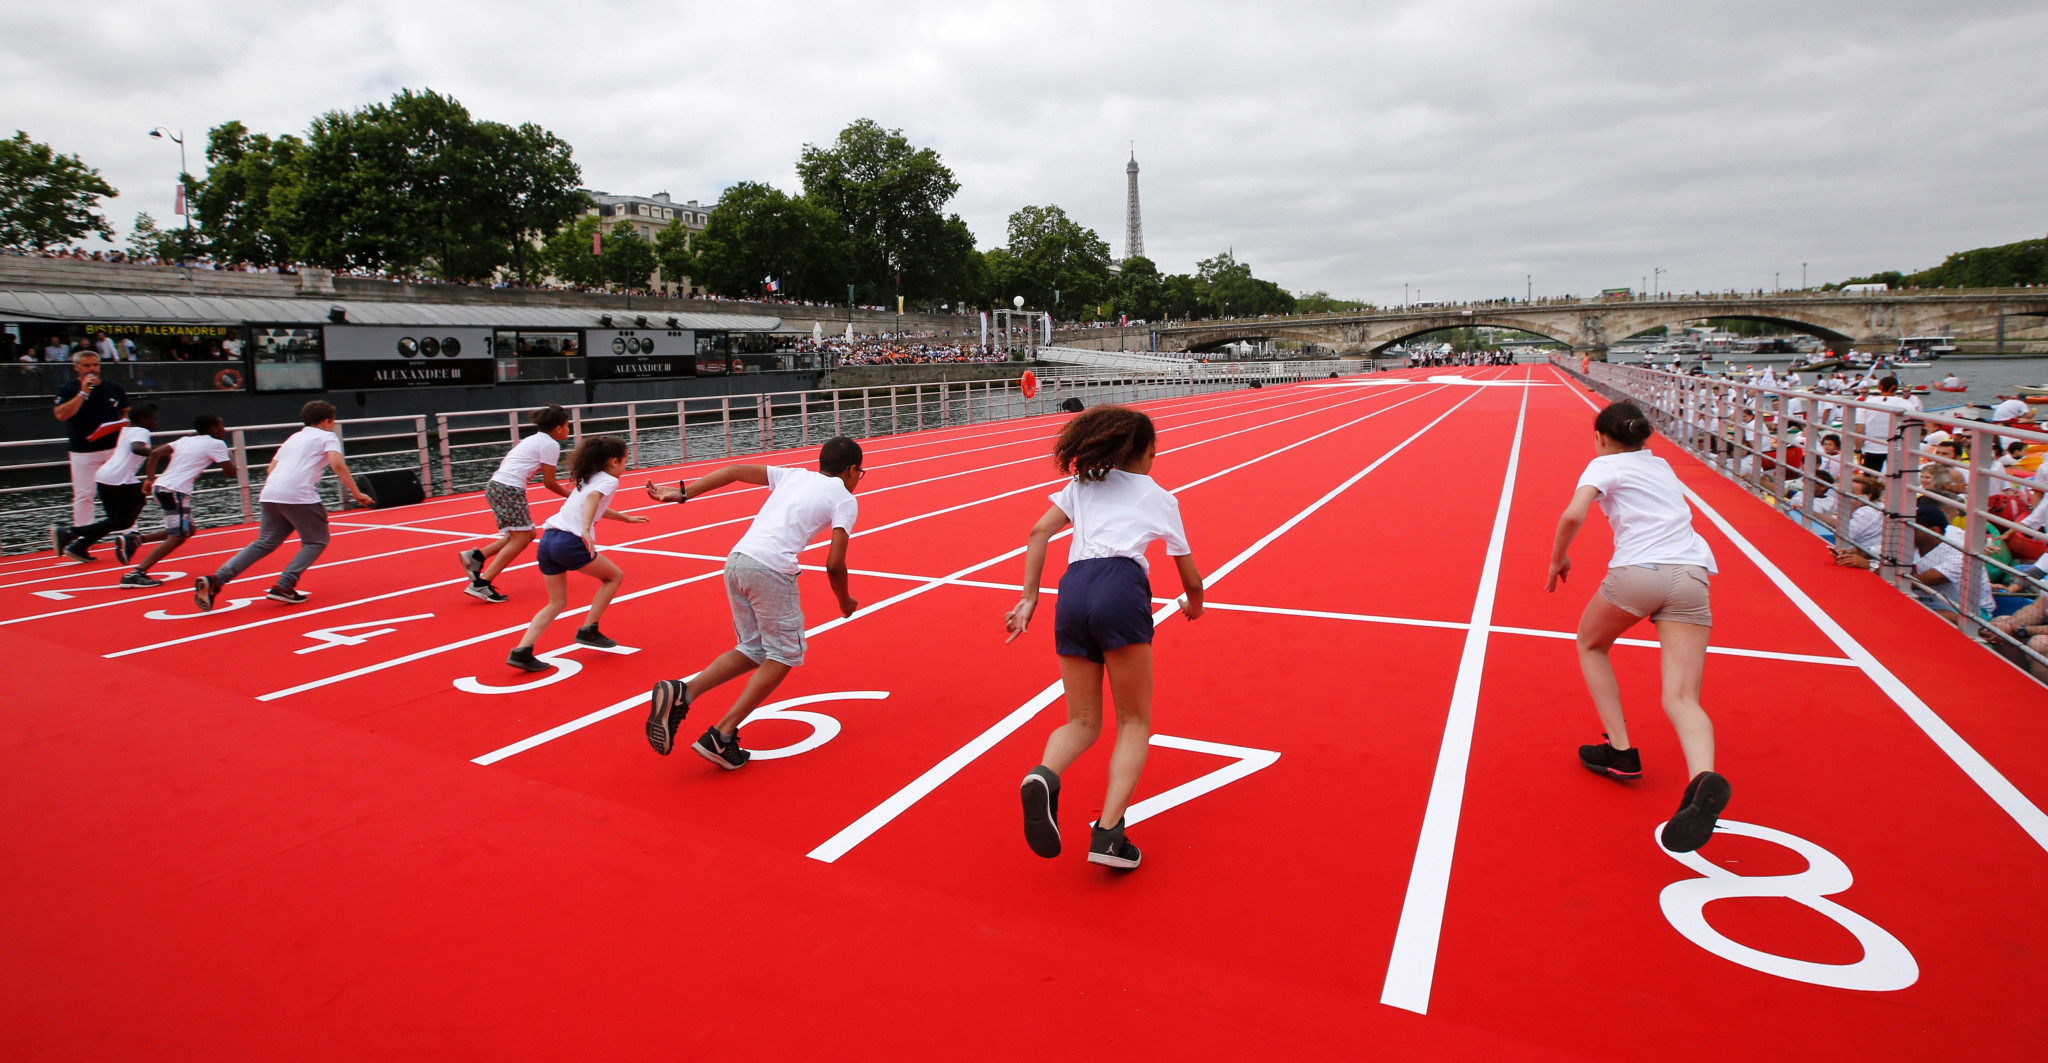 The Kids' Athletics programme has been implemented as a part of the plans ©Getty Images